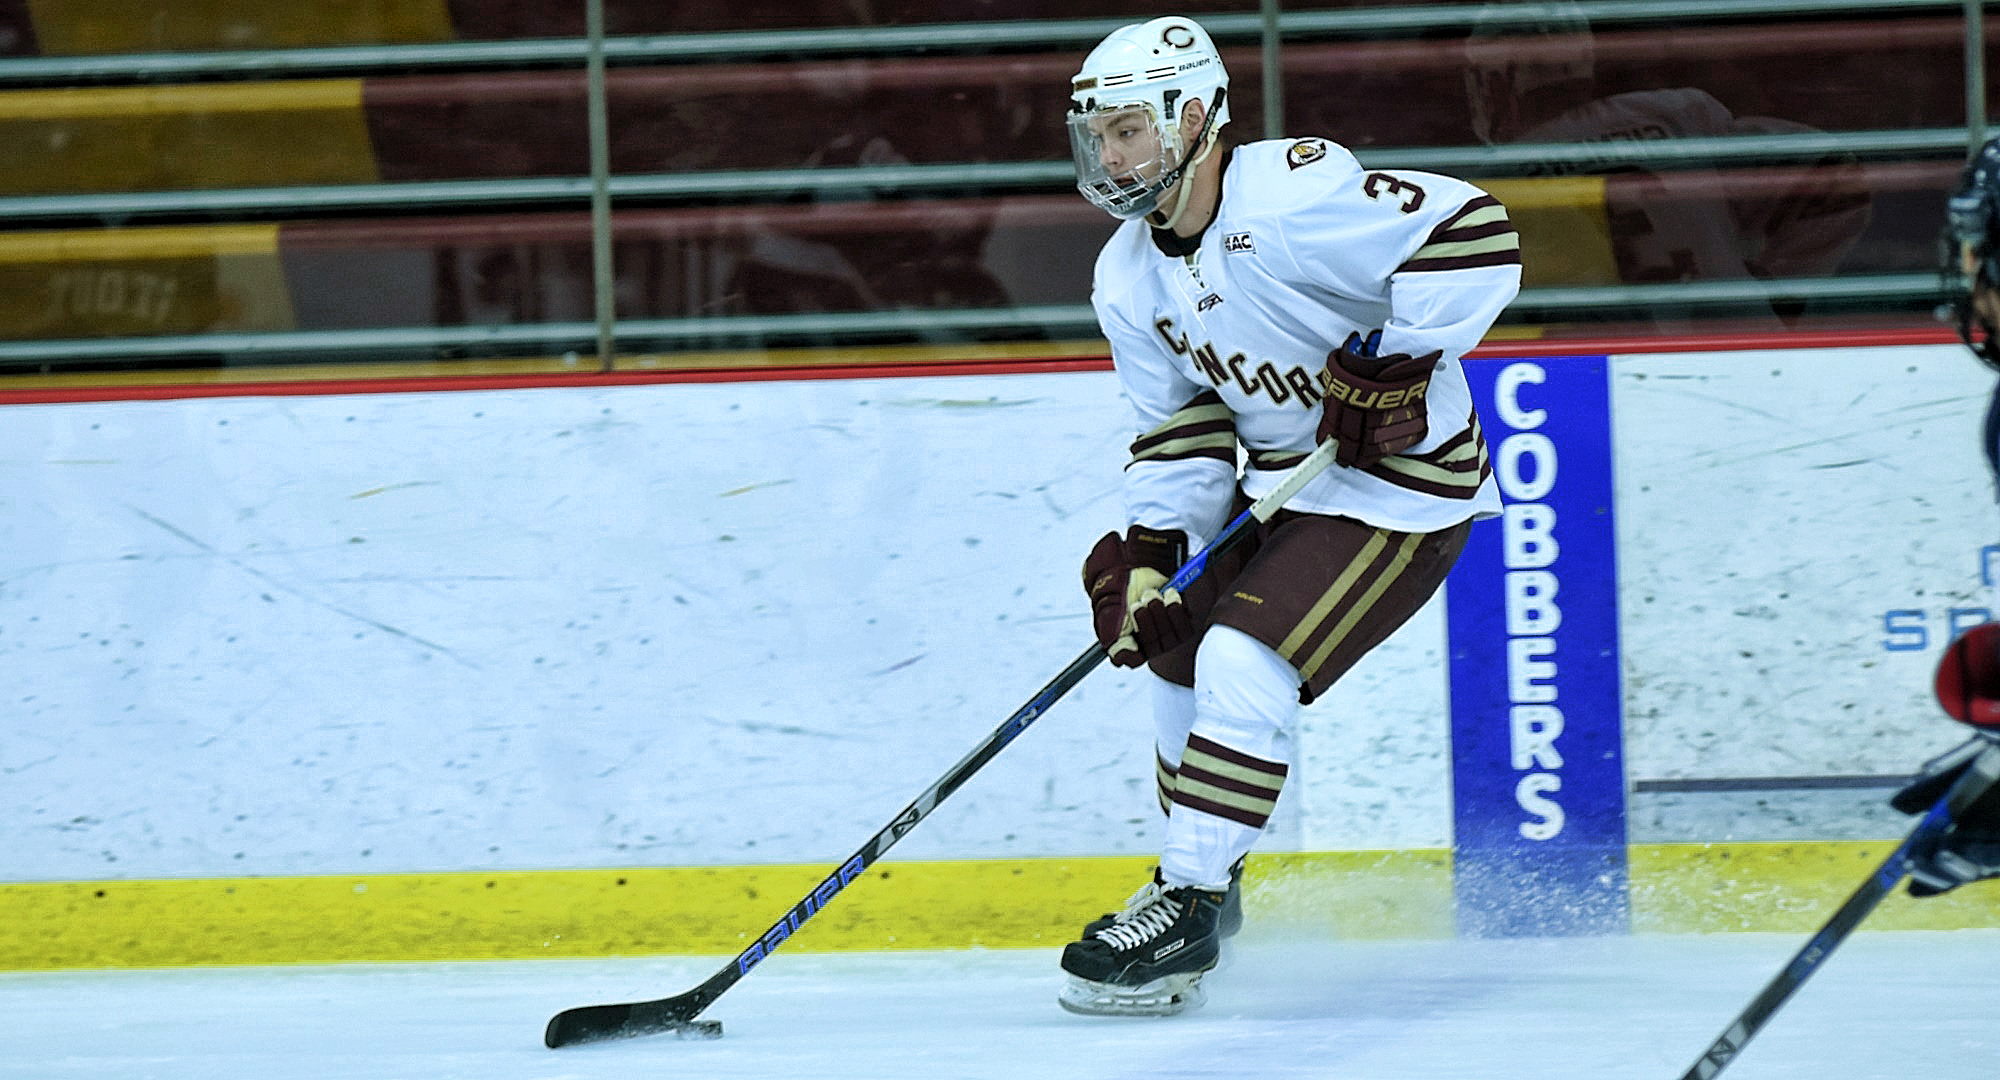 Sophomore defenseman Kyle Siemers had a goal and an assist in the Cobbers' 3-2 loss against Wis.-Stevens Point.